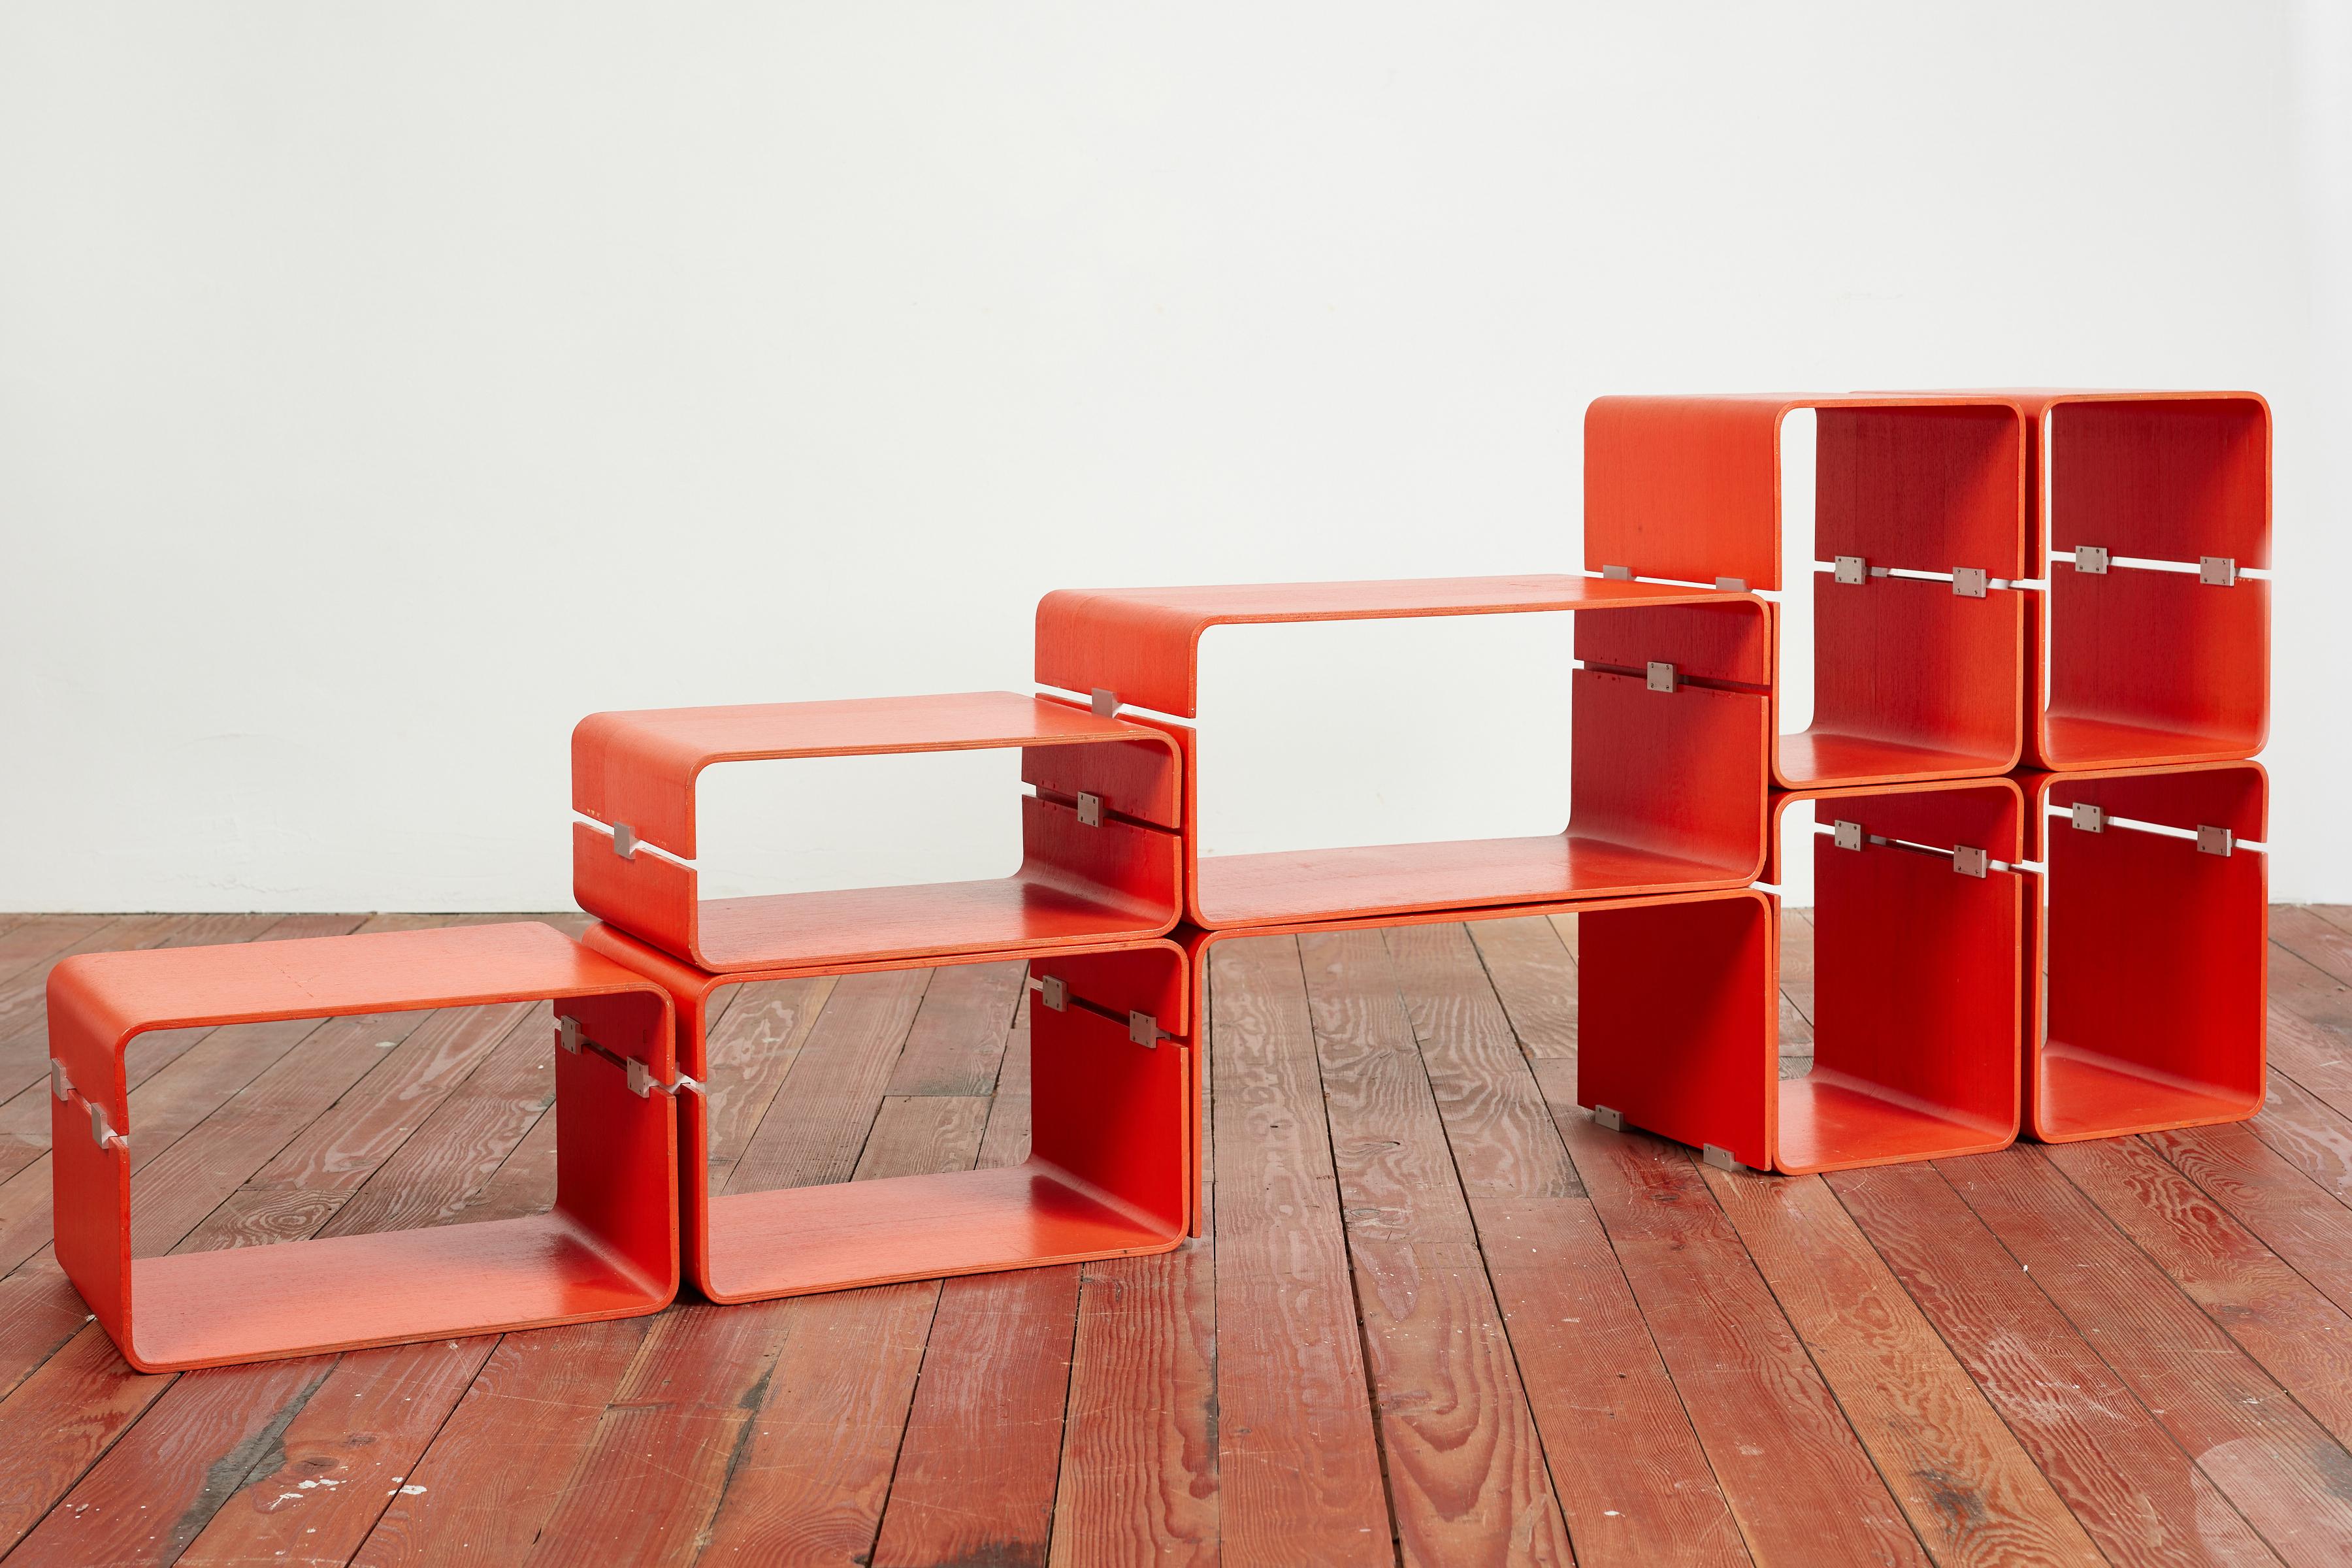 Jacques Dumond bookcase - Lyon, France circa 1963

Fully modular bookcase composed of nine boxes, each in two molded plywood elements connected by cast aluminum hardware that fasten them together.

Bookcase can be constructed in various different